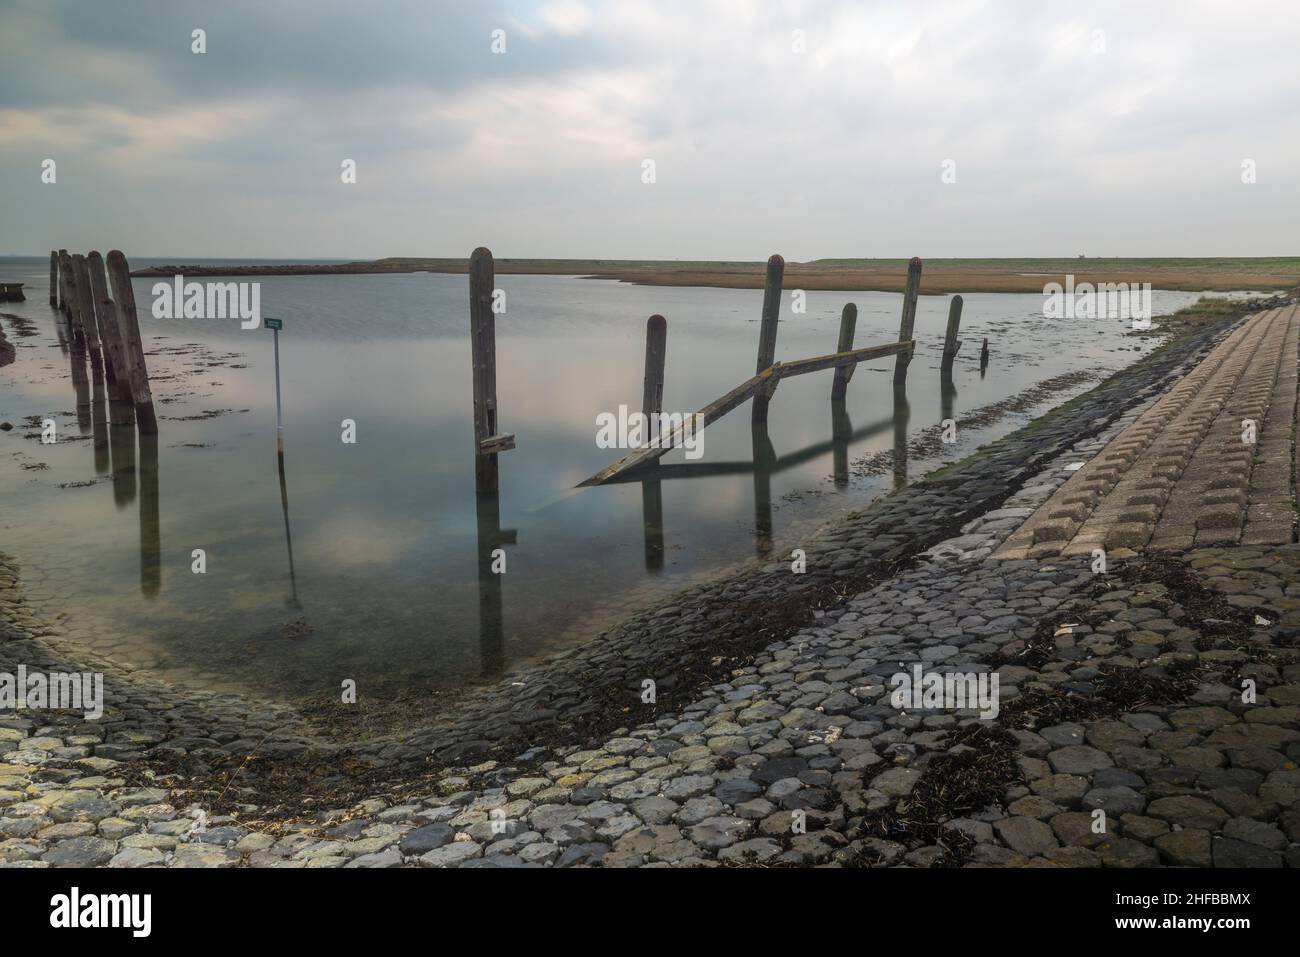 Wooden poles as remainder of a historic harbor in an inlayer (inlaag) of Noord-Beveland, Zeeland province, Netherlands Stock Photo